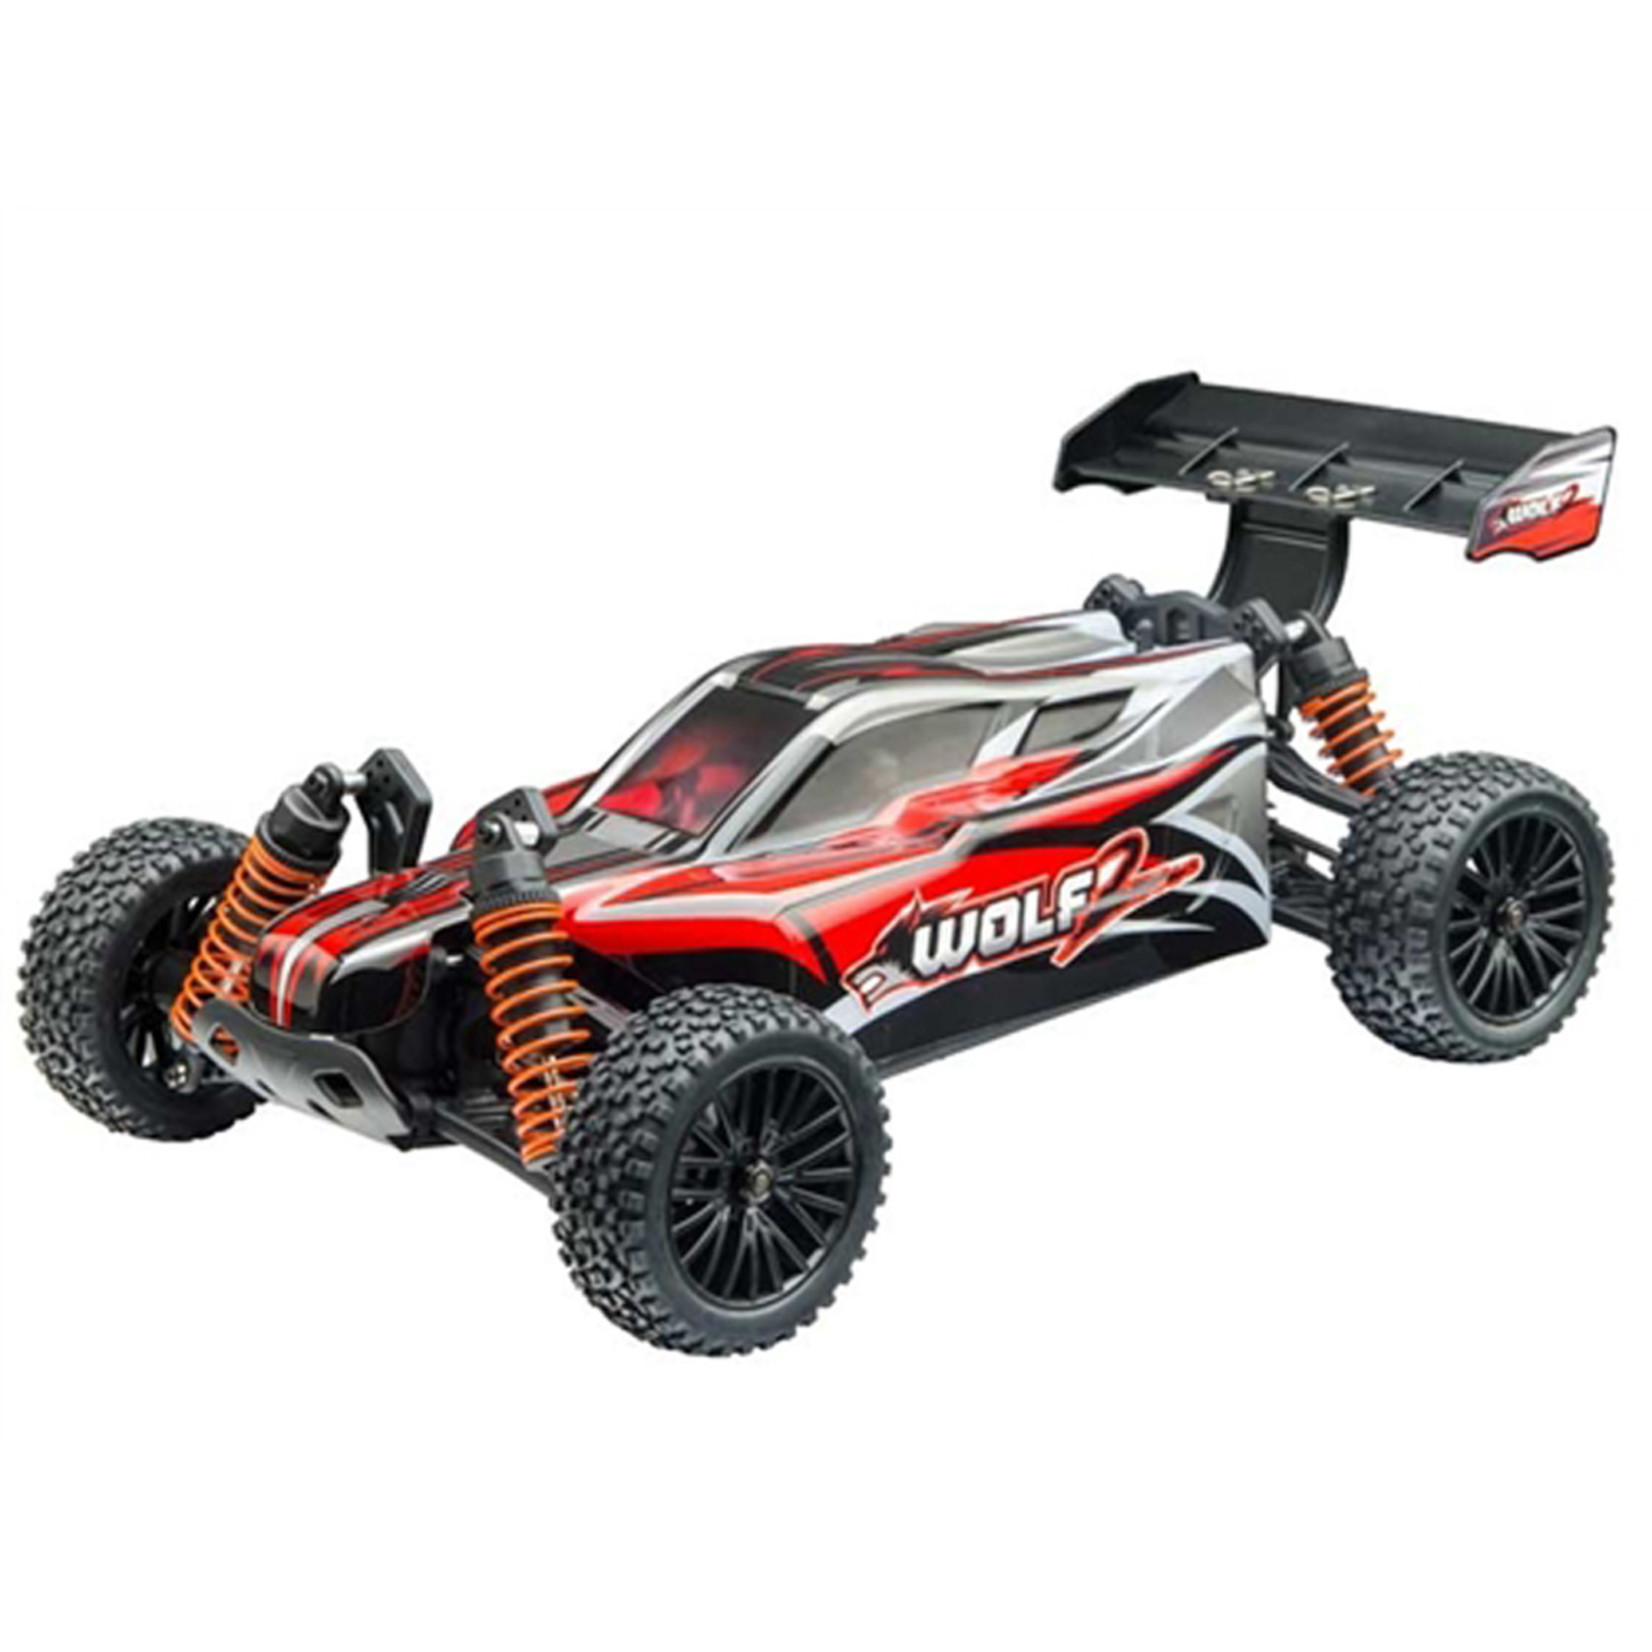 DHK Hobby Wolf 2 1/10 4WD Buggy RTR with Battery and Charger